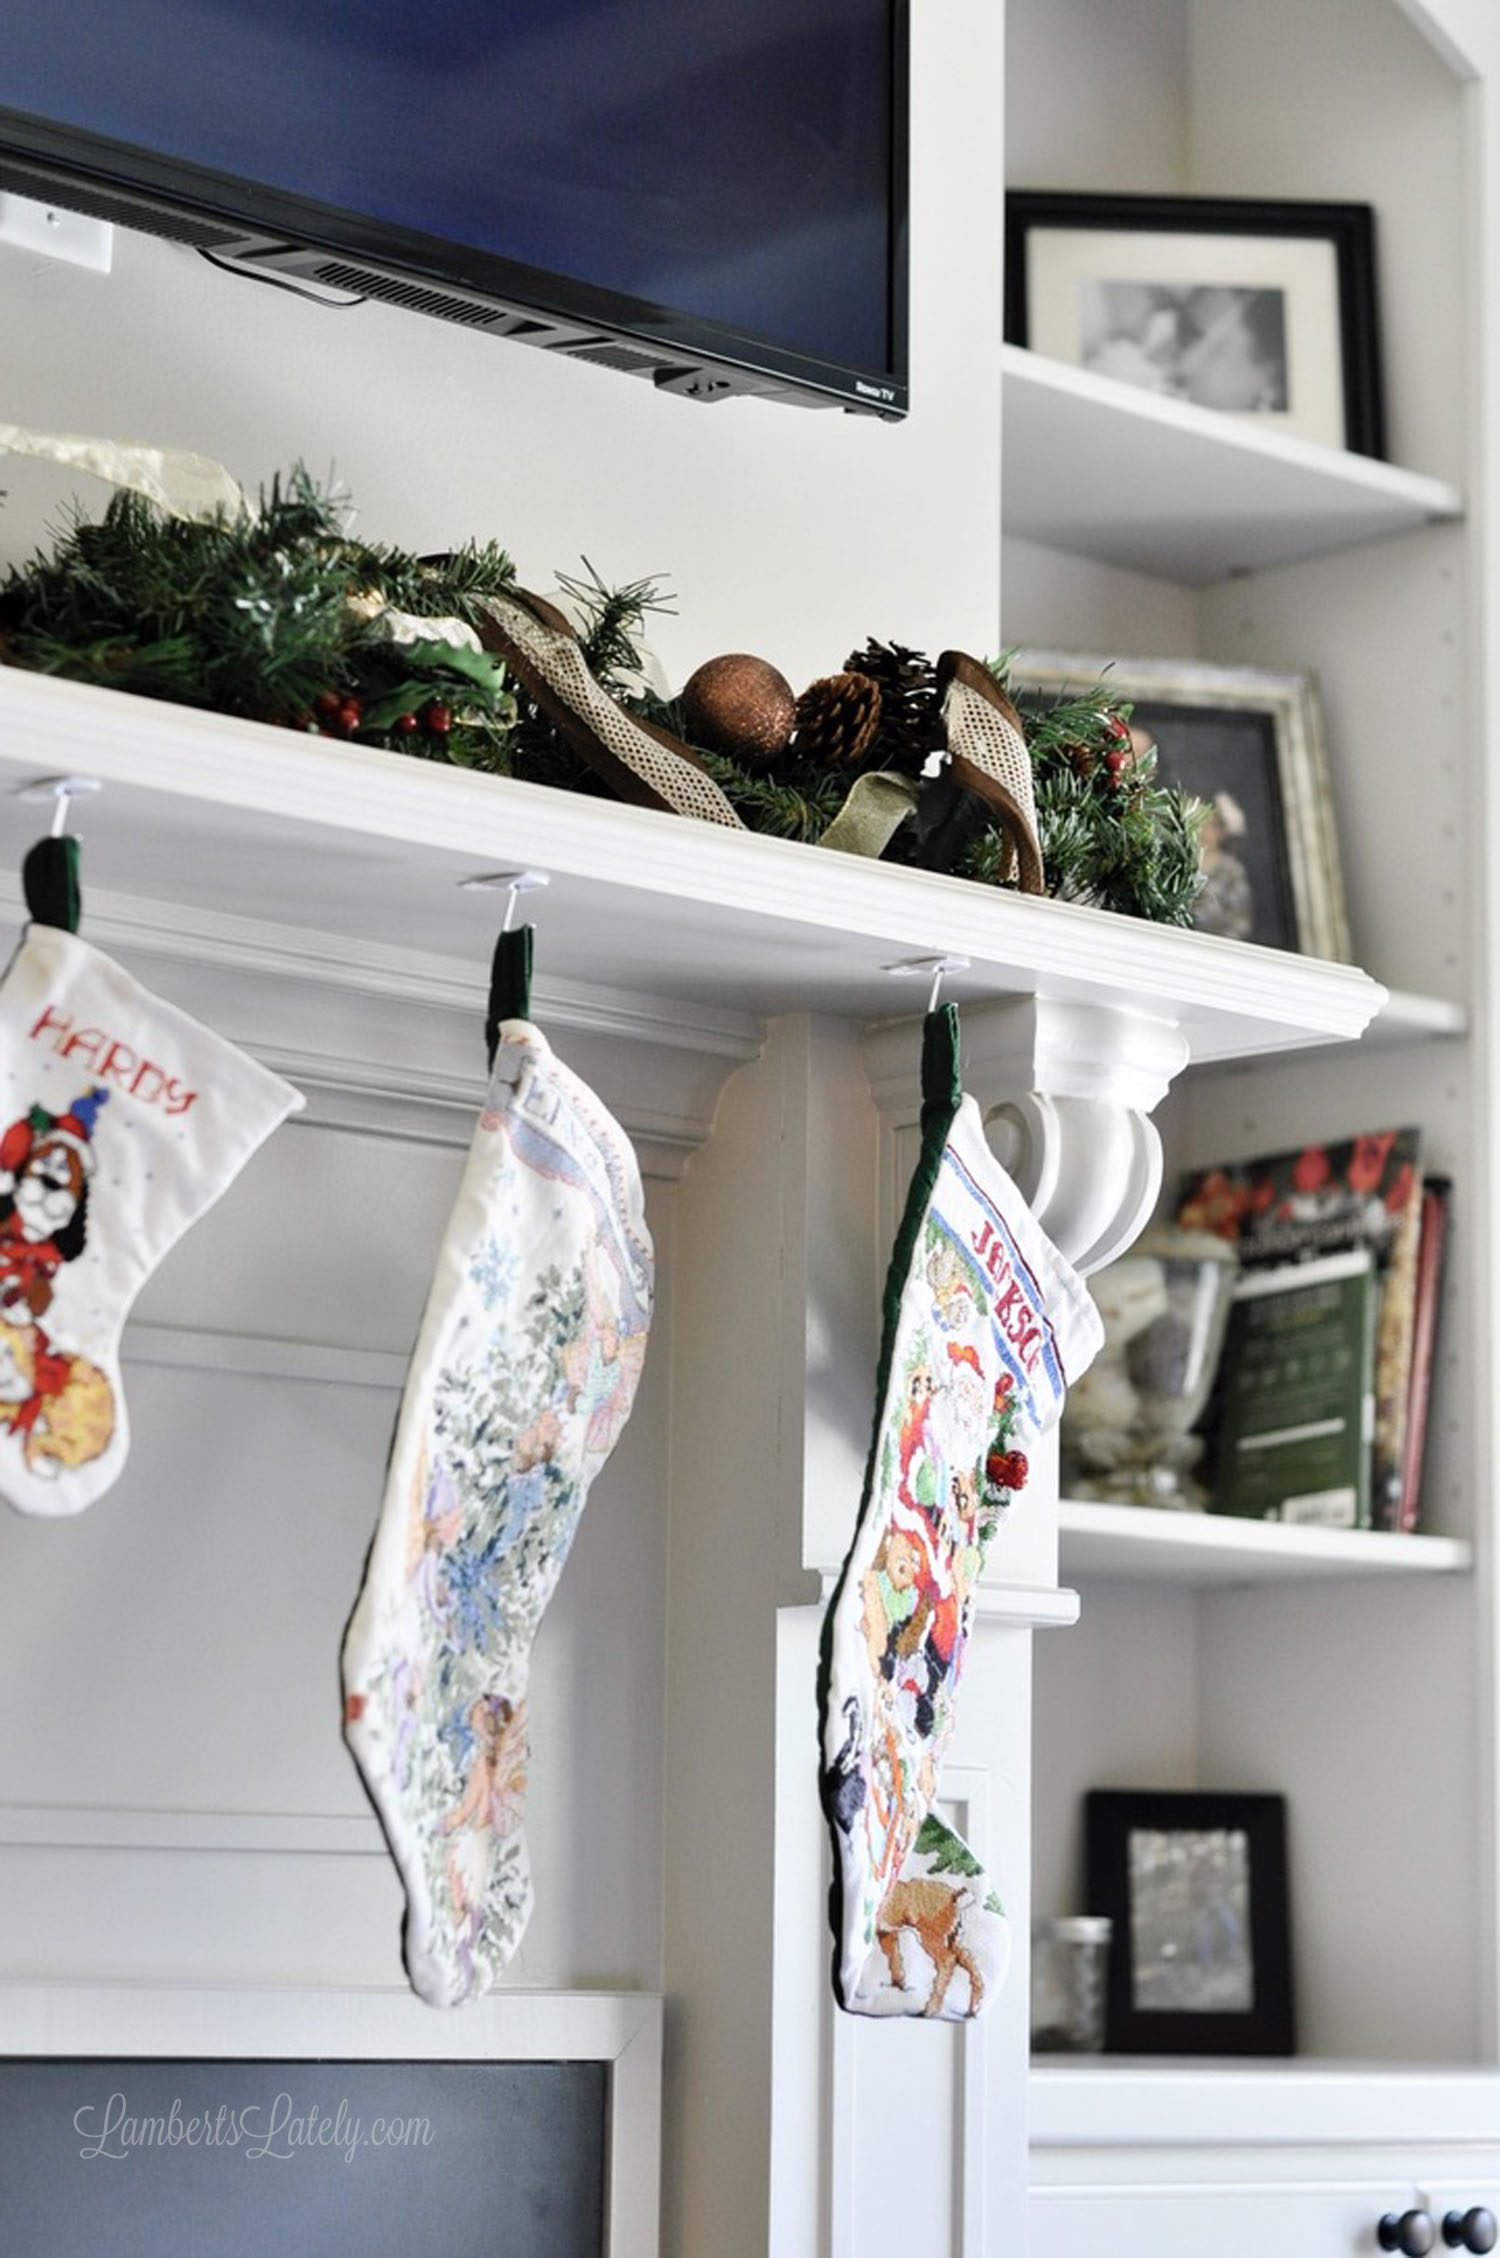 stocking stuffers for babies - stockings on mantle